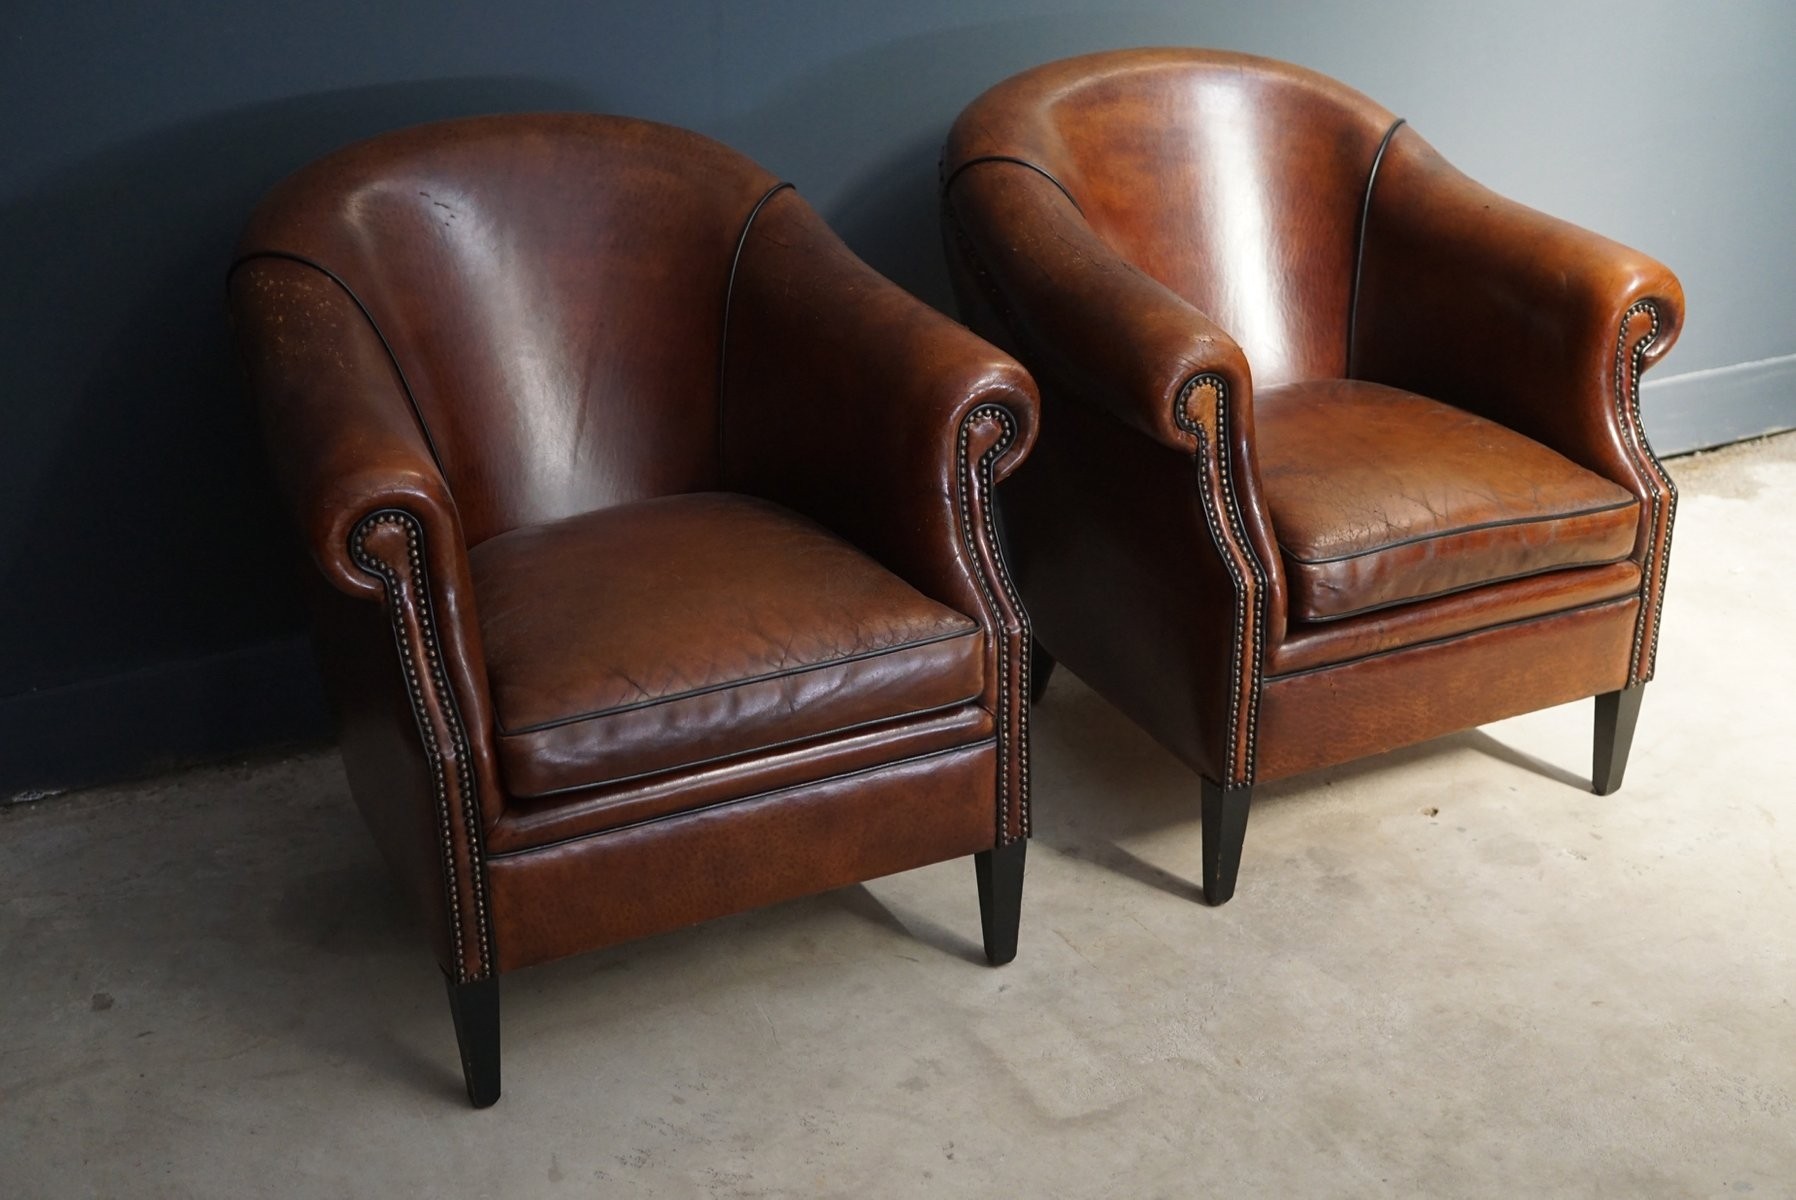 Vintage cognac leather club chairs set of 2 for sale